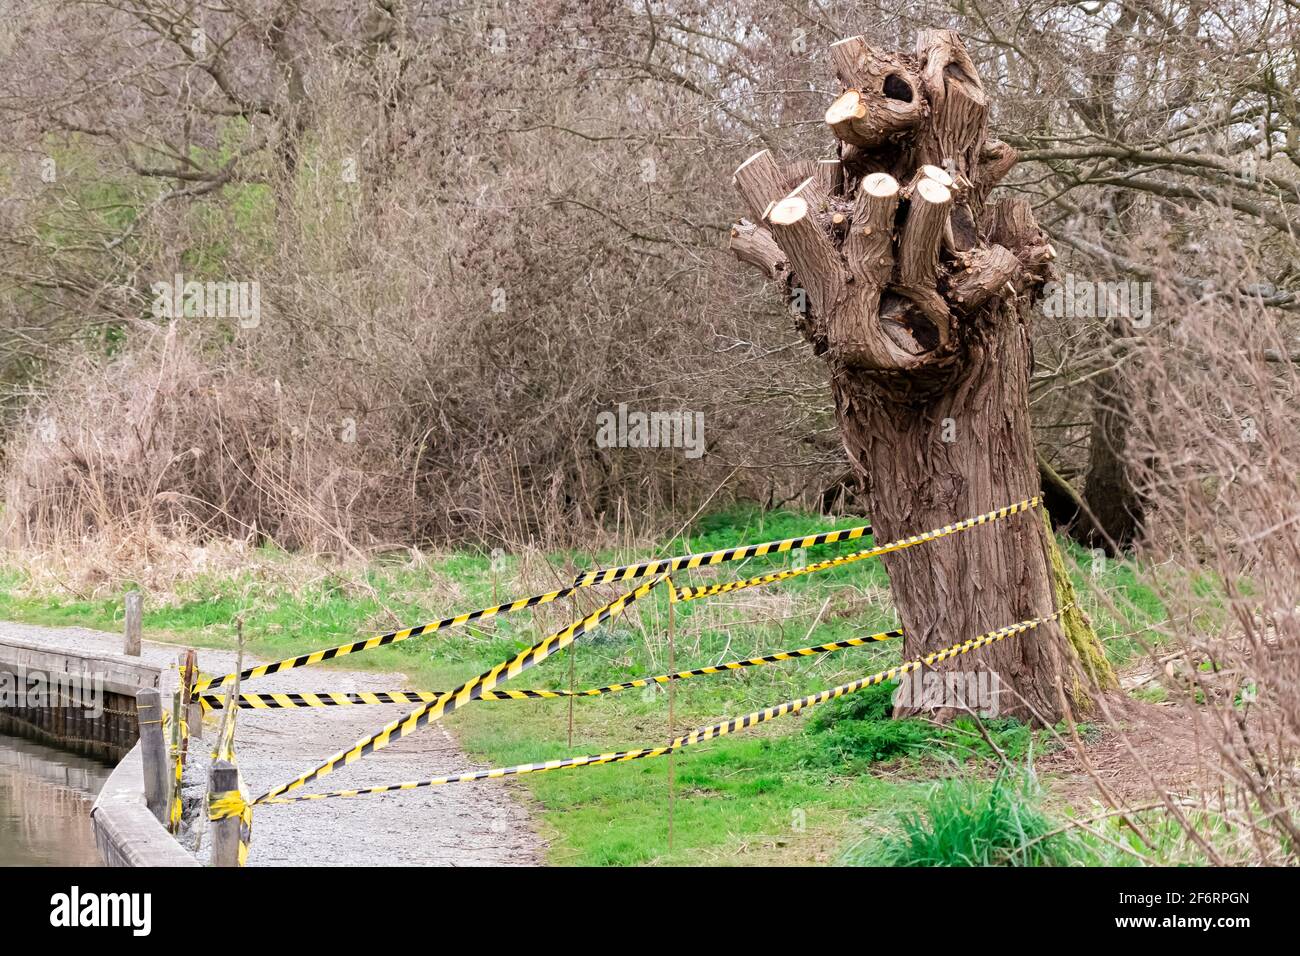 Page 3 - River Bank With Boat Moorings High Resolution Stock Photography  and Images - Alamy